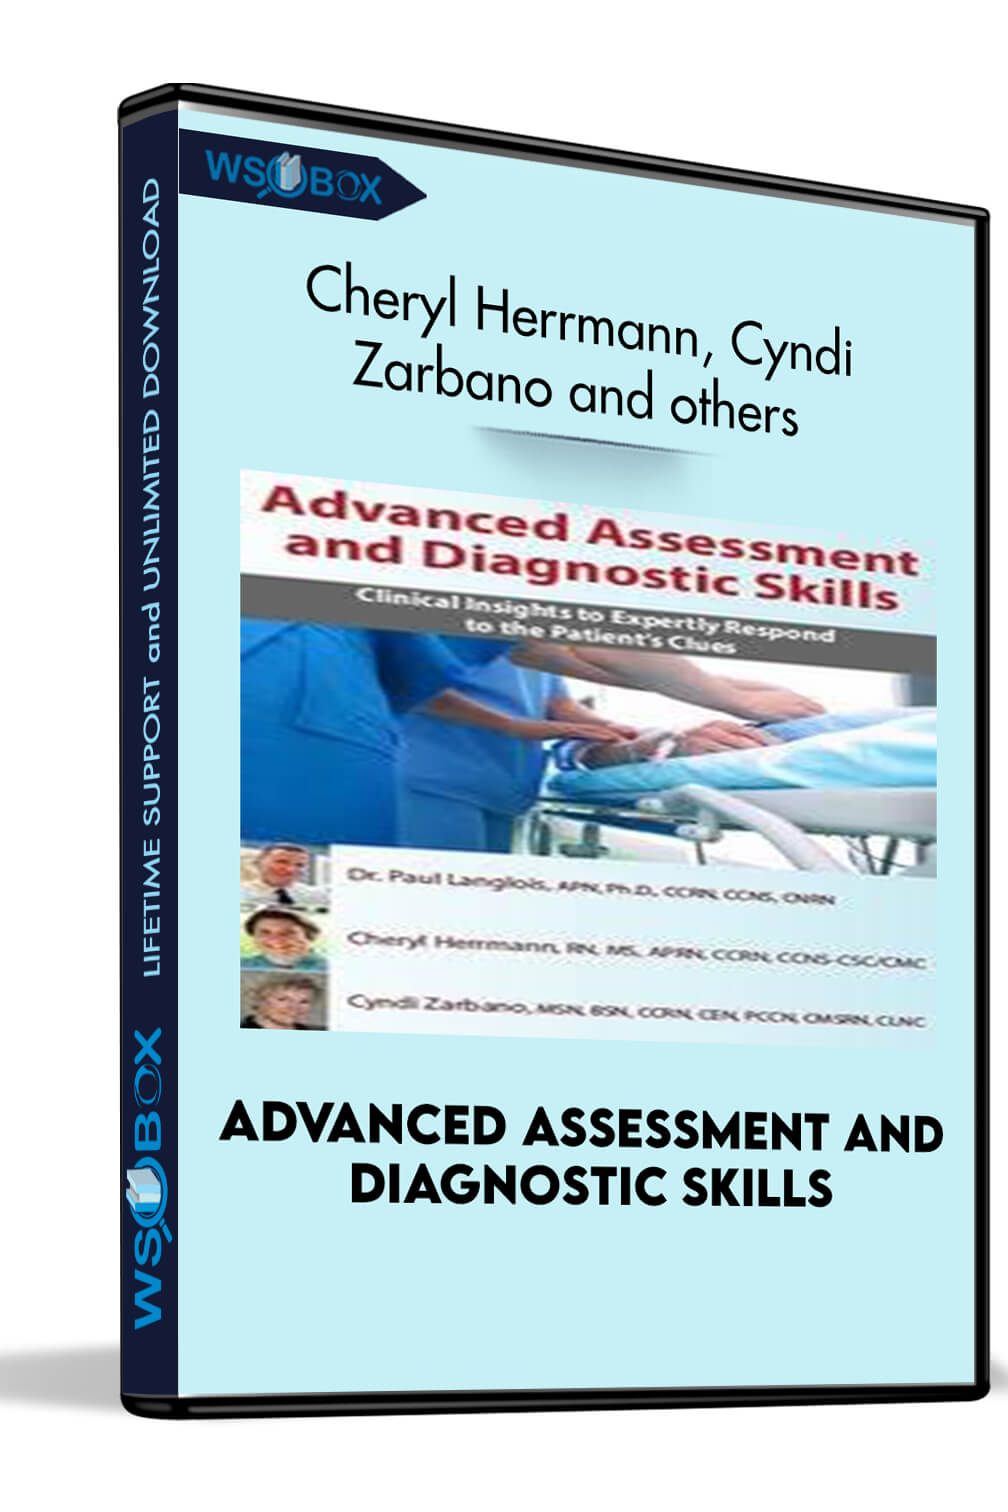 Advanced Assessment and Diagnostic Skills: Clinical Insights to Expertly Respond to the Patient's Clues - Cheryl Herrmann, Cyndi Zarbano and Dr. Paul Langlois